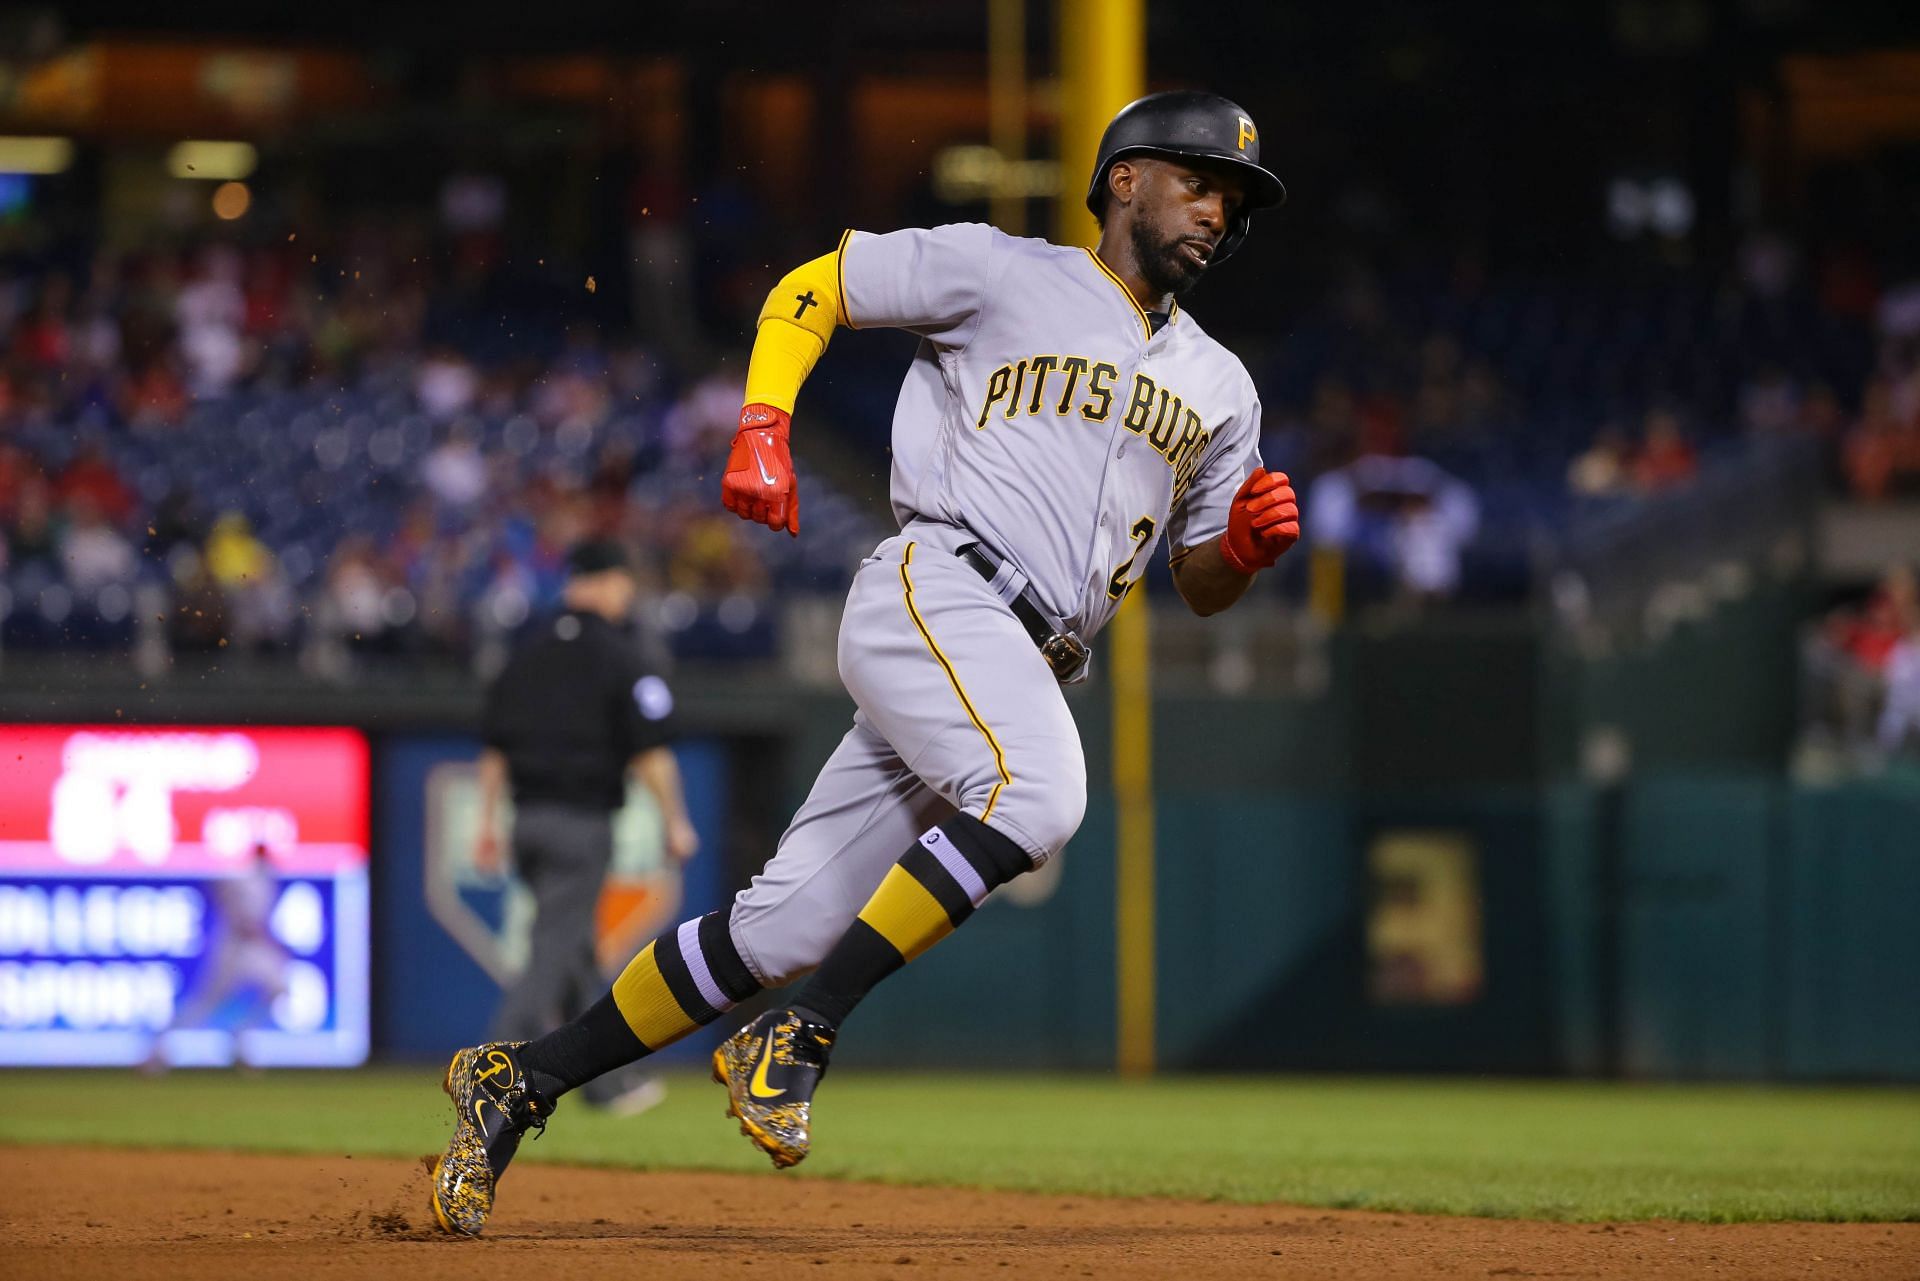 Andrew McCutchen of the Pittsburgh Pirates reacts as he rounds the